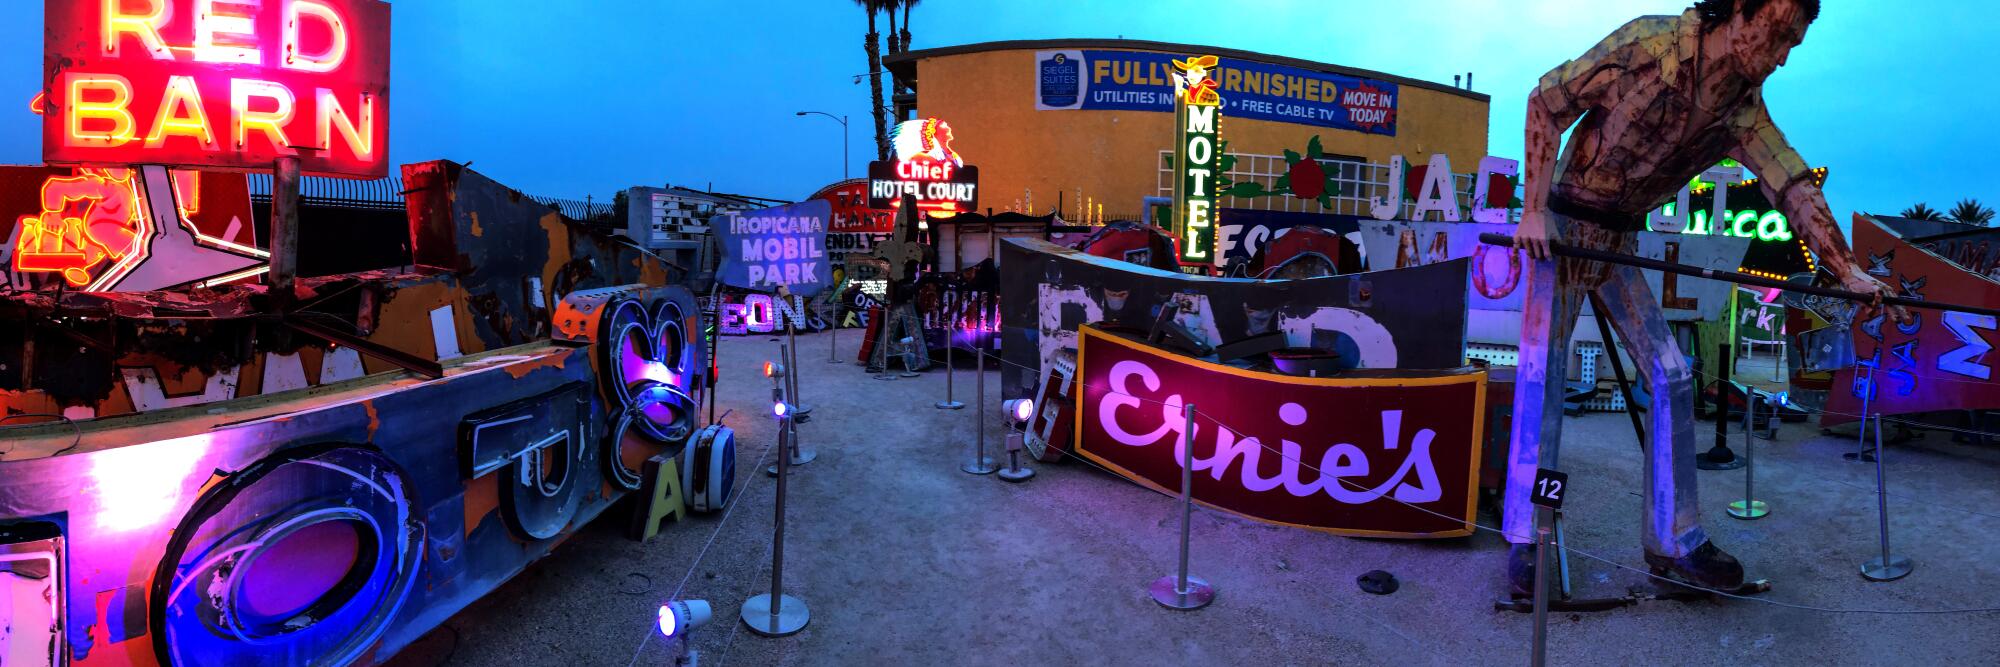 Neon Museum, Las Vegas, with neon signs for Red Barn and Motel, buildings and a tall statue of a man.